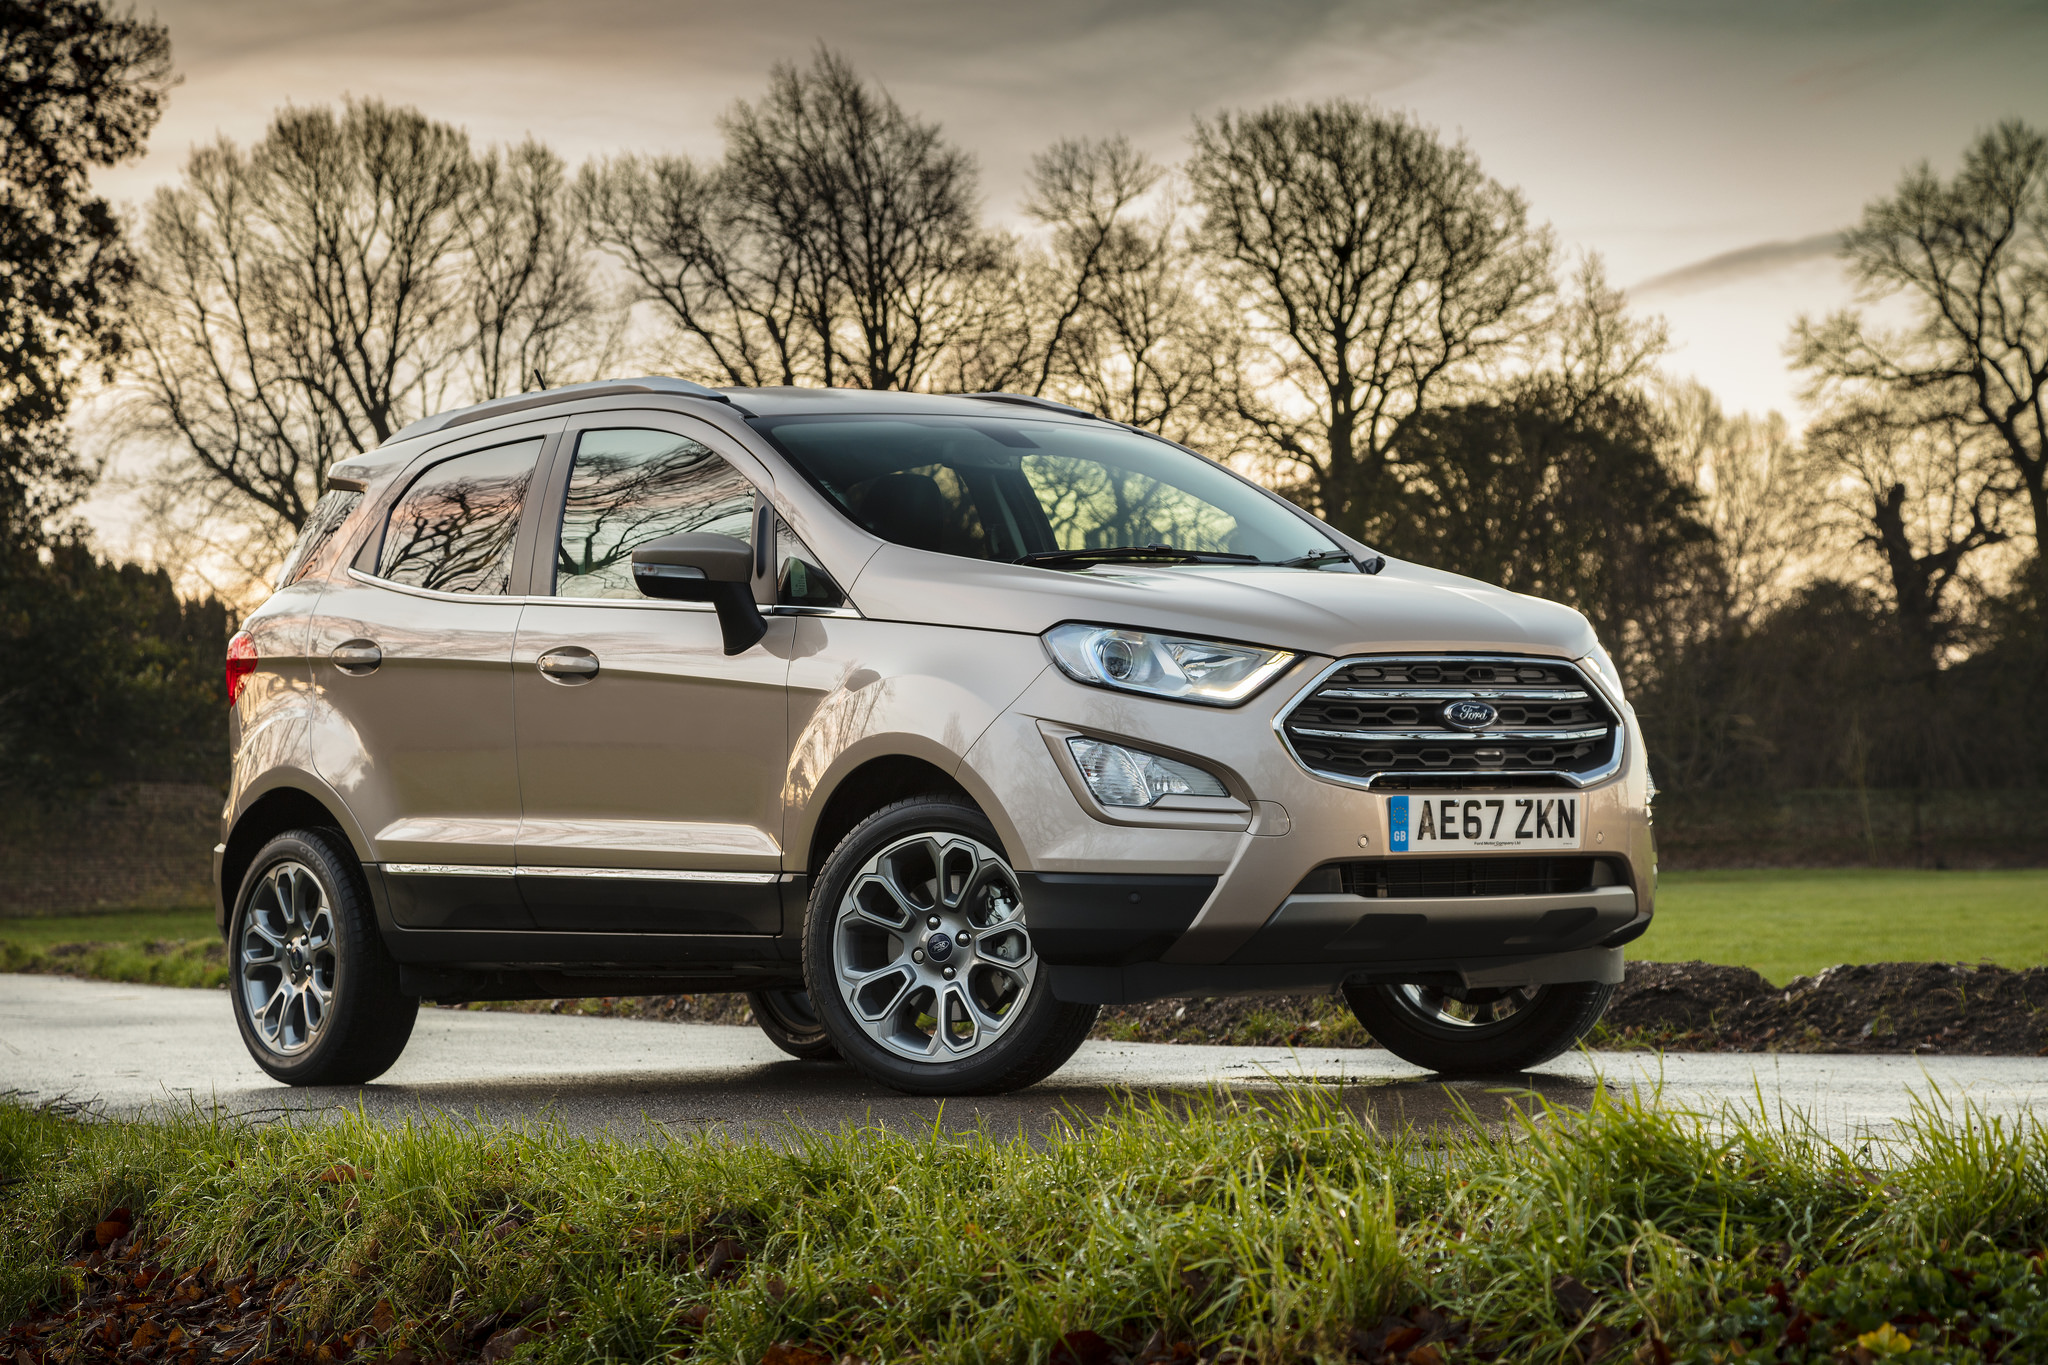 Lotto winner rewards himself with new Ford Ecosport